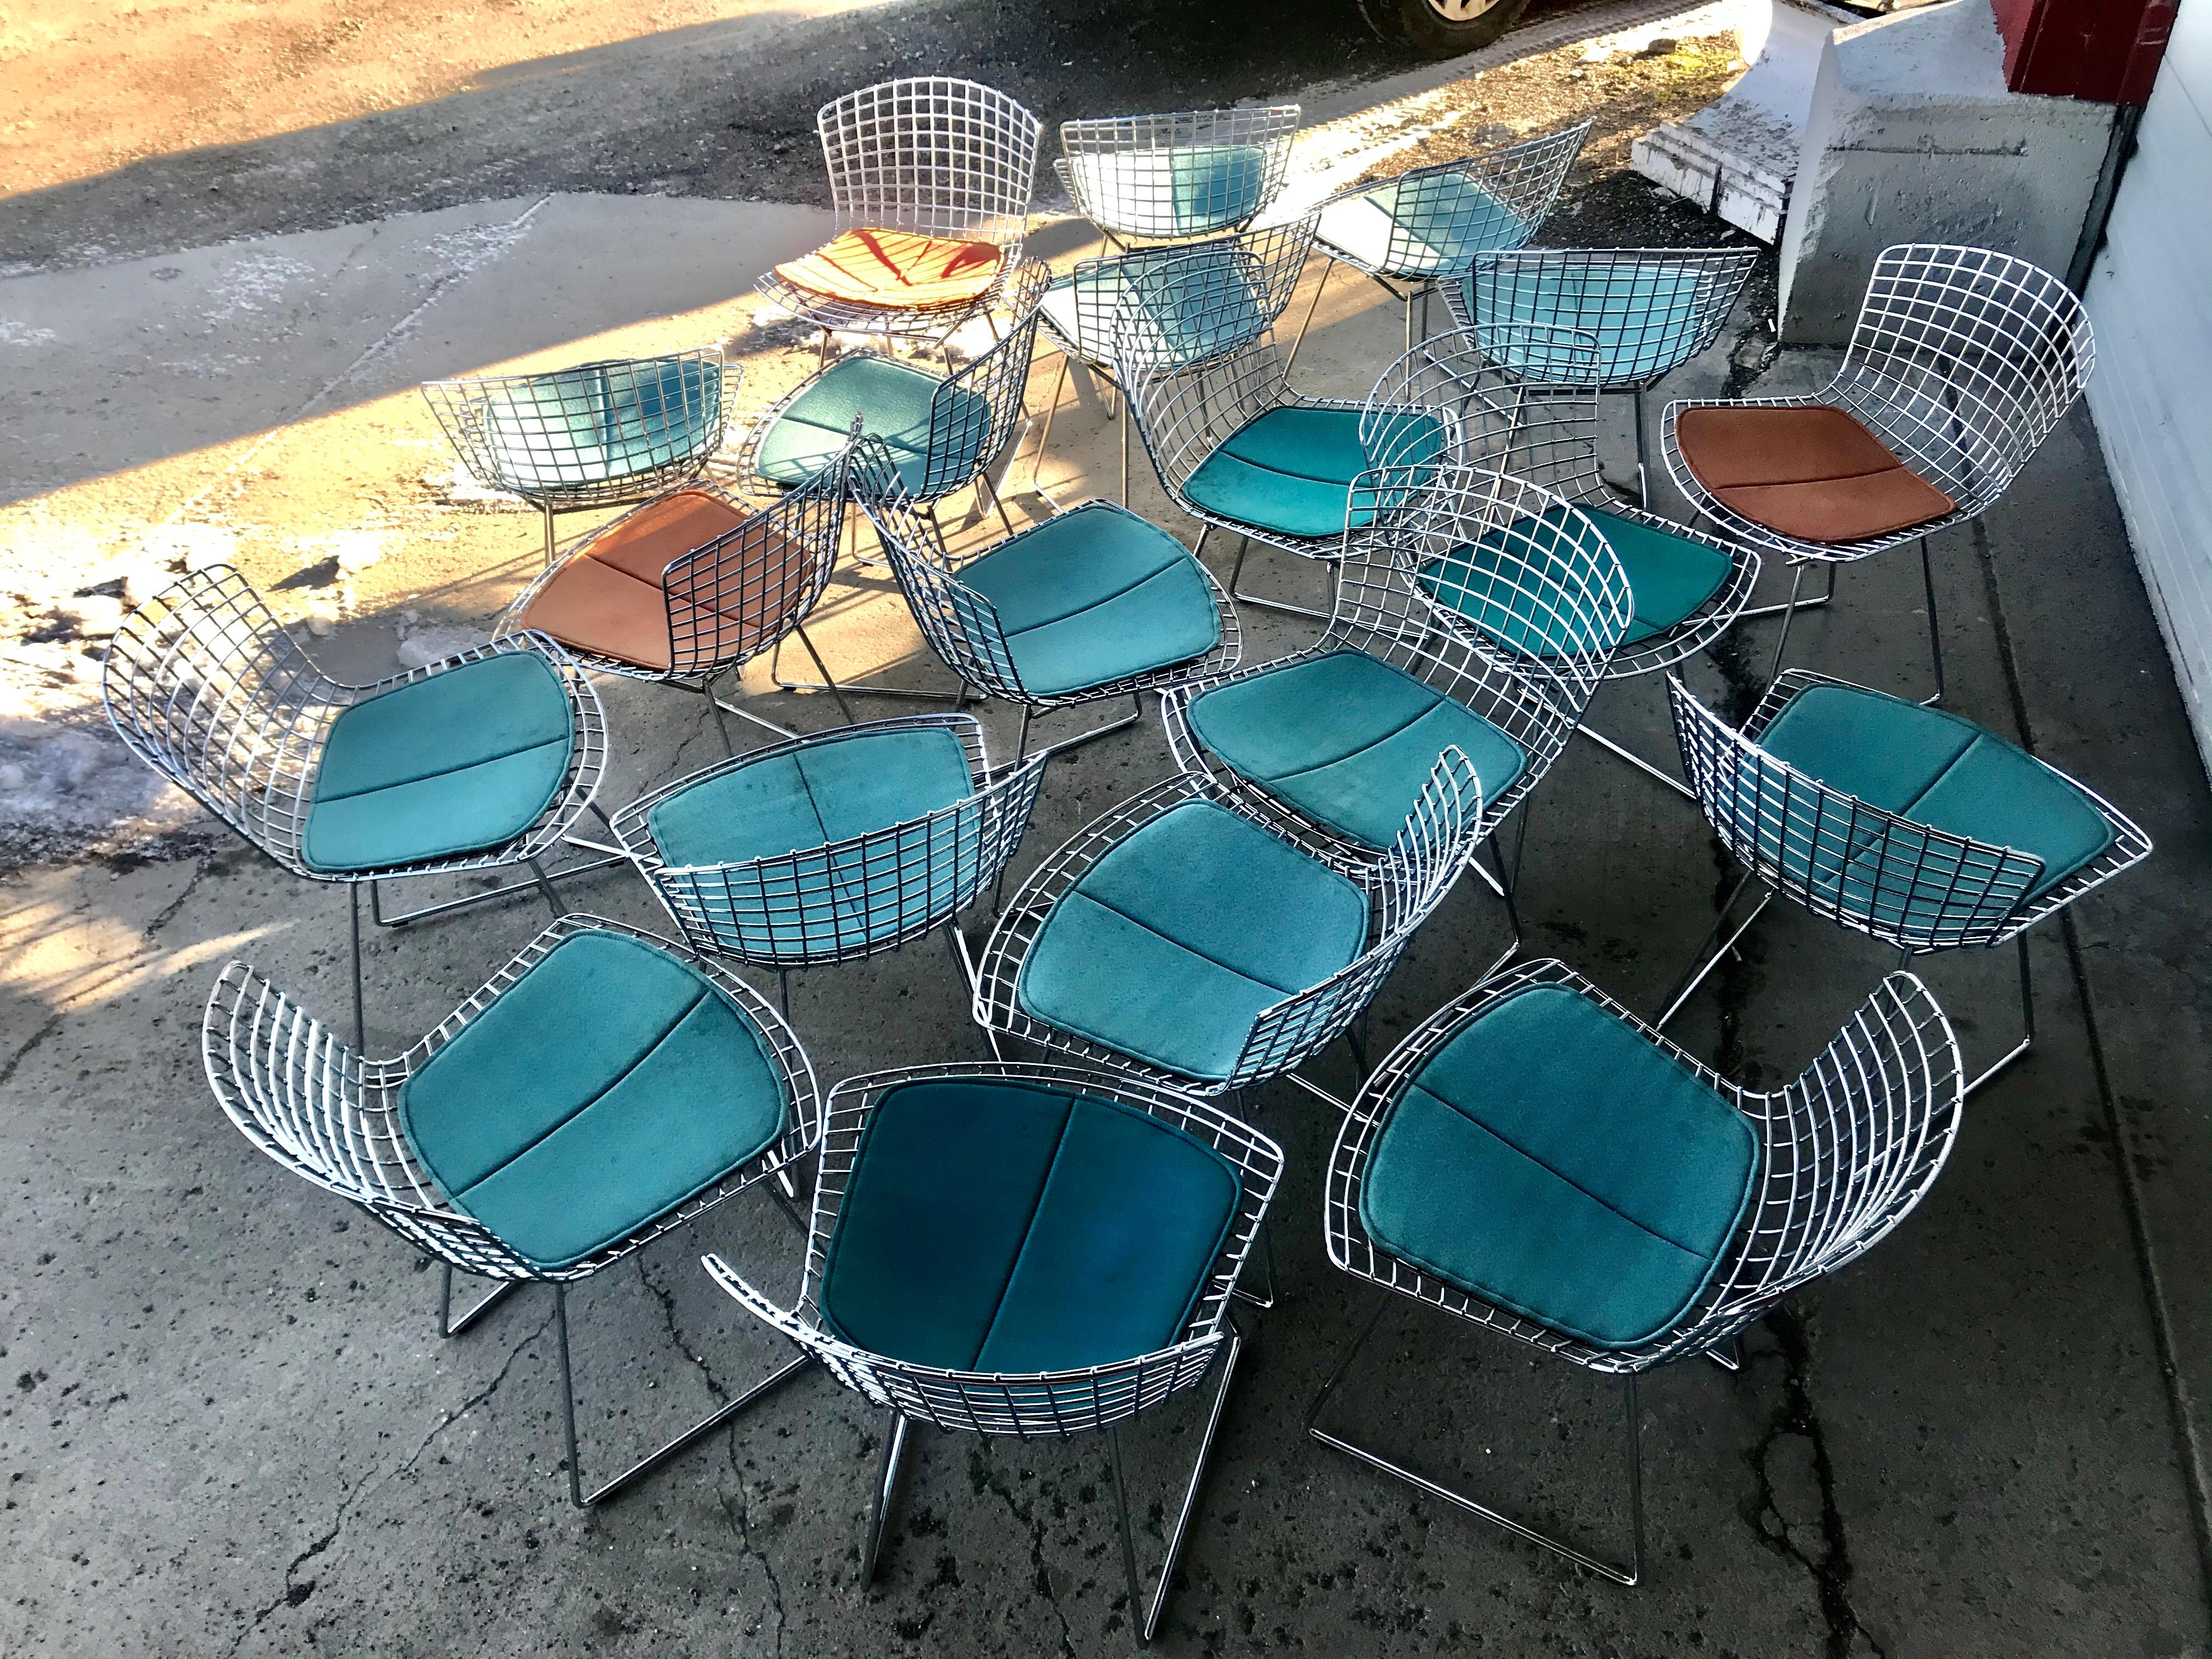 20 vintage chrome side chairs designed by Harry Bertoia manufactured by Knoll, nice original condition, some soiling to original seat pads, minor surface rust, Classic modernist design. Hand delivery avail to New York City or anywhere en route from